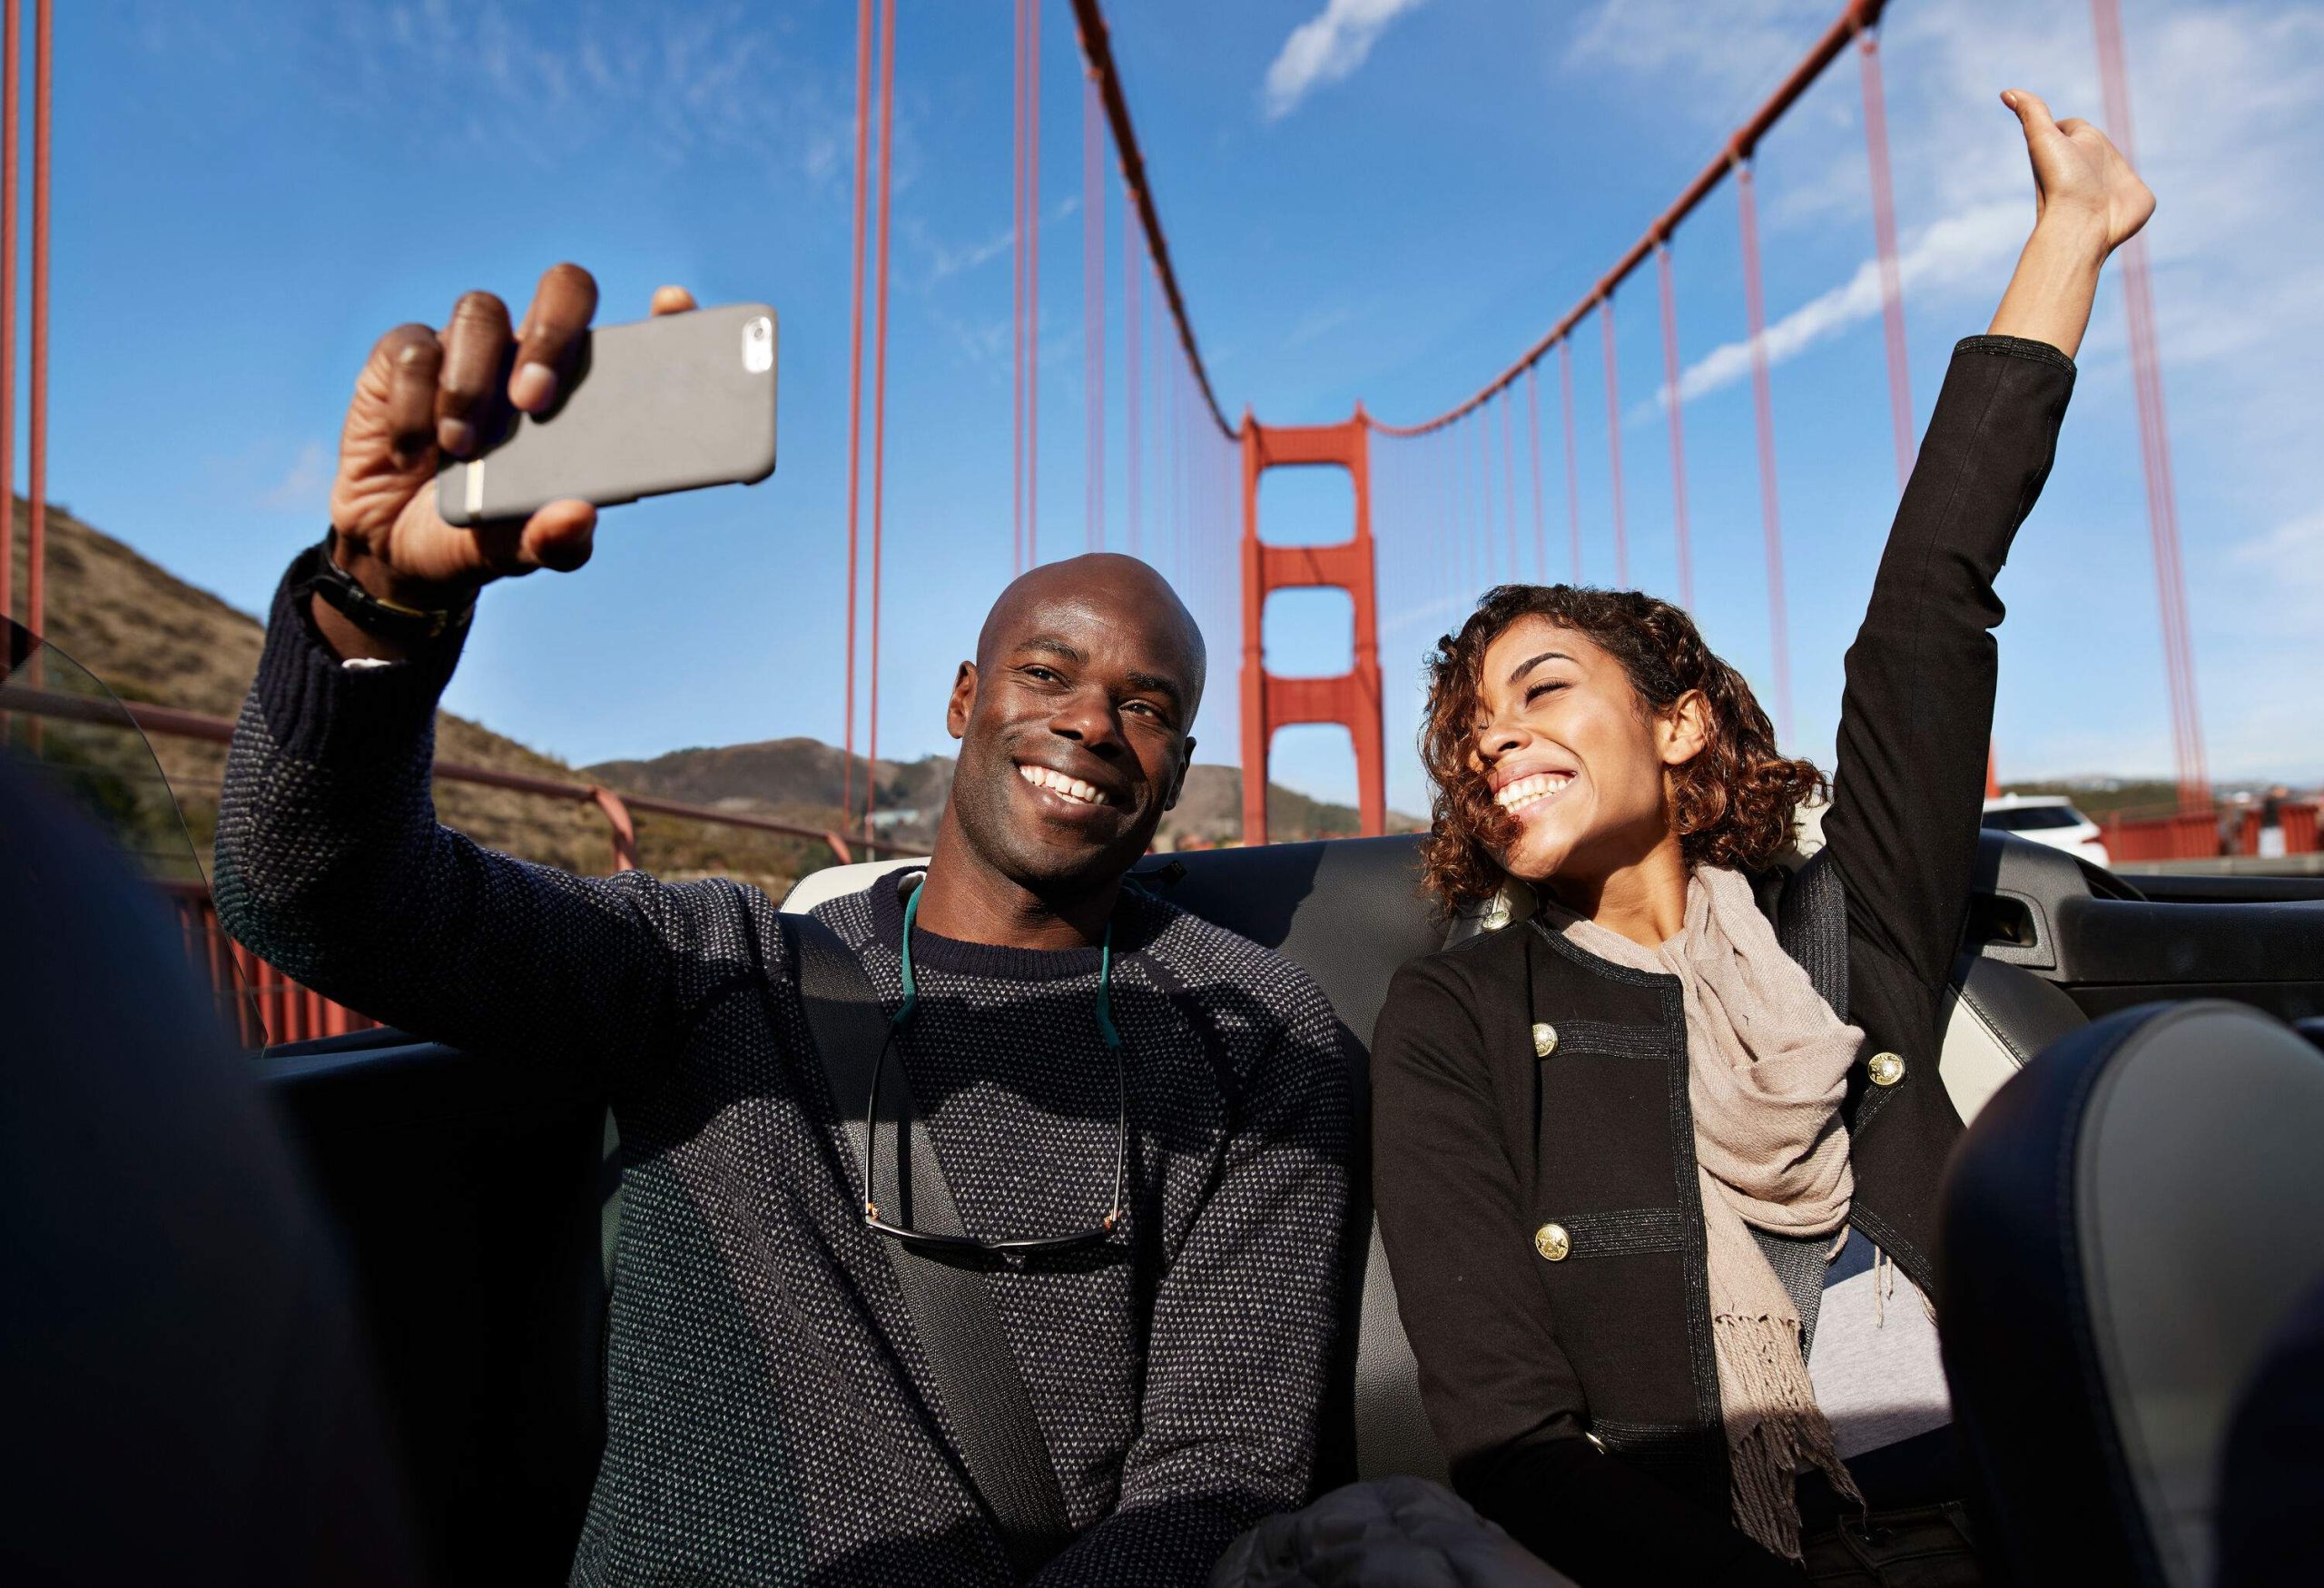 A man and a woman taking a selfie as they ride in the backseat of a car with the top down on a bridge.